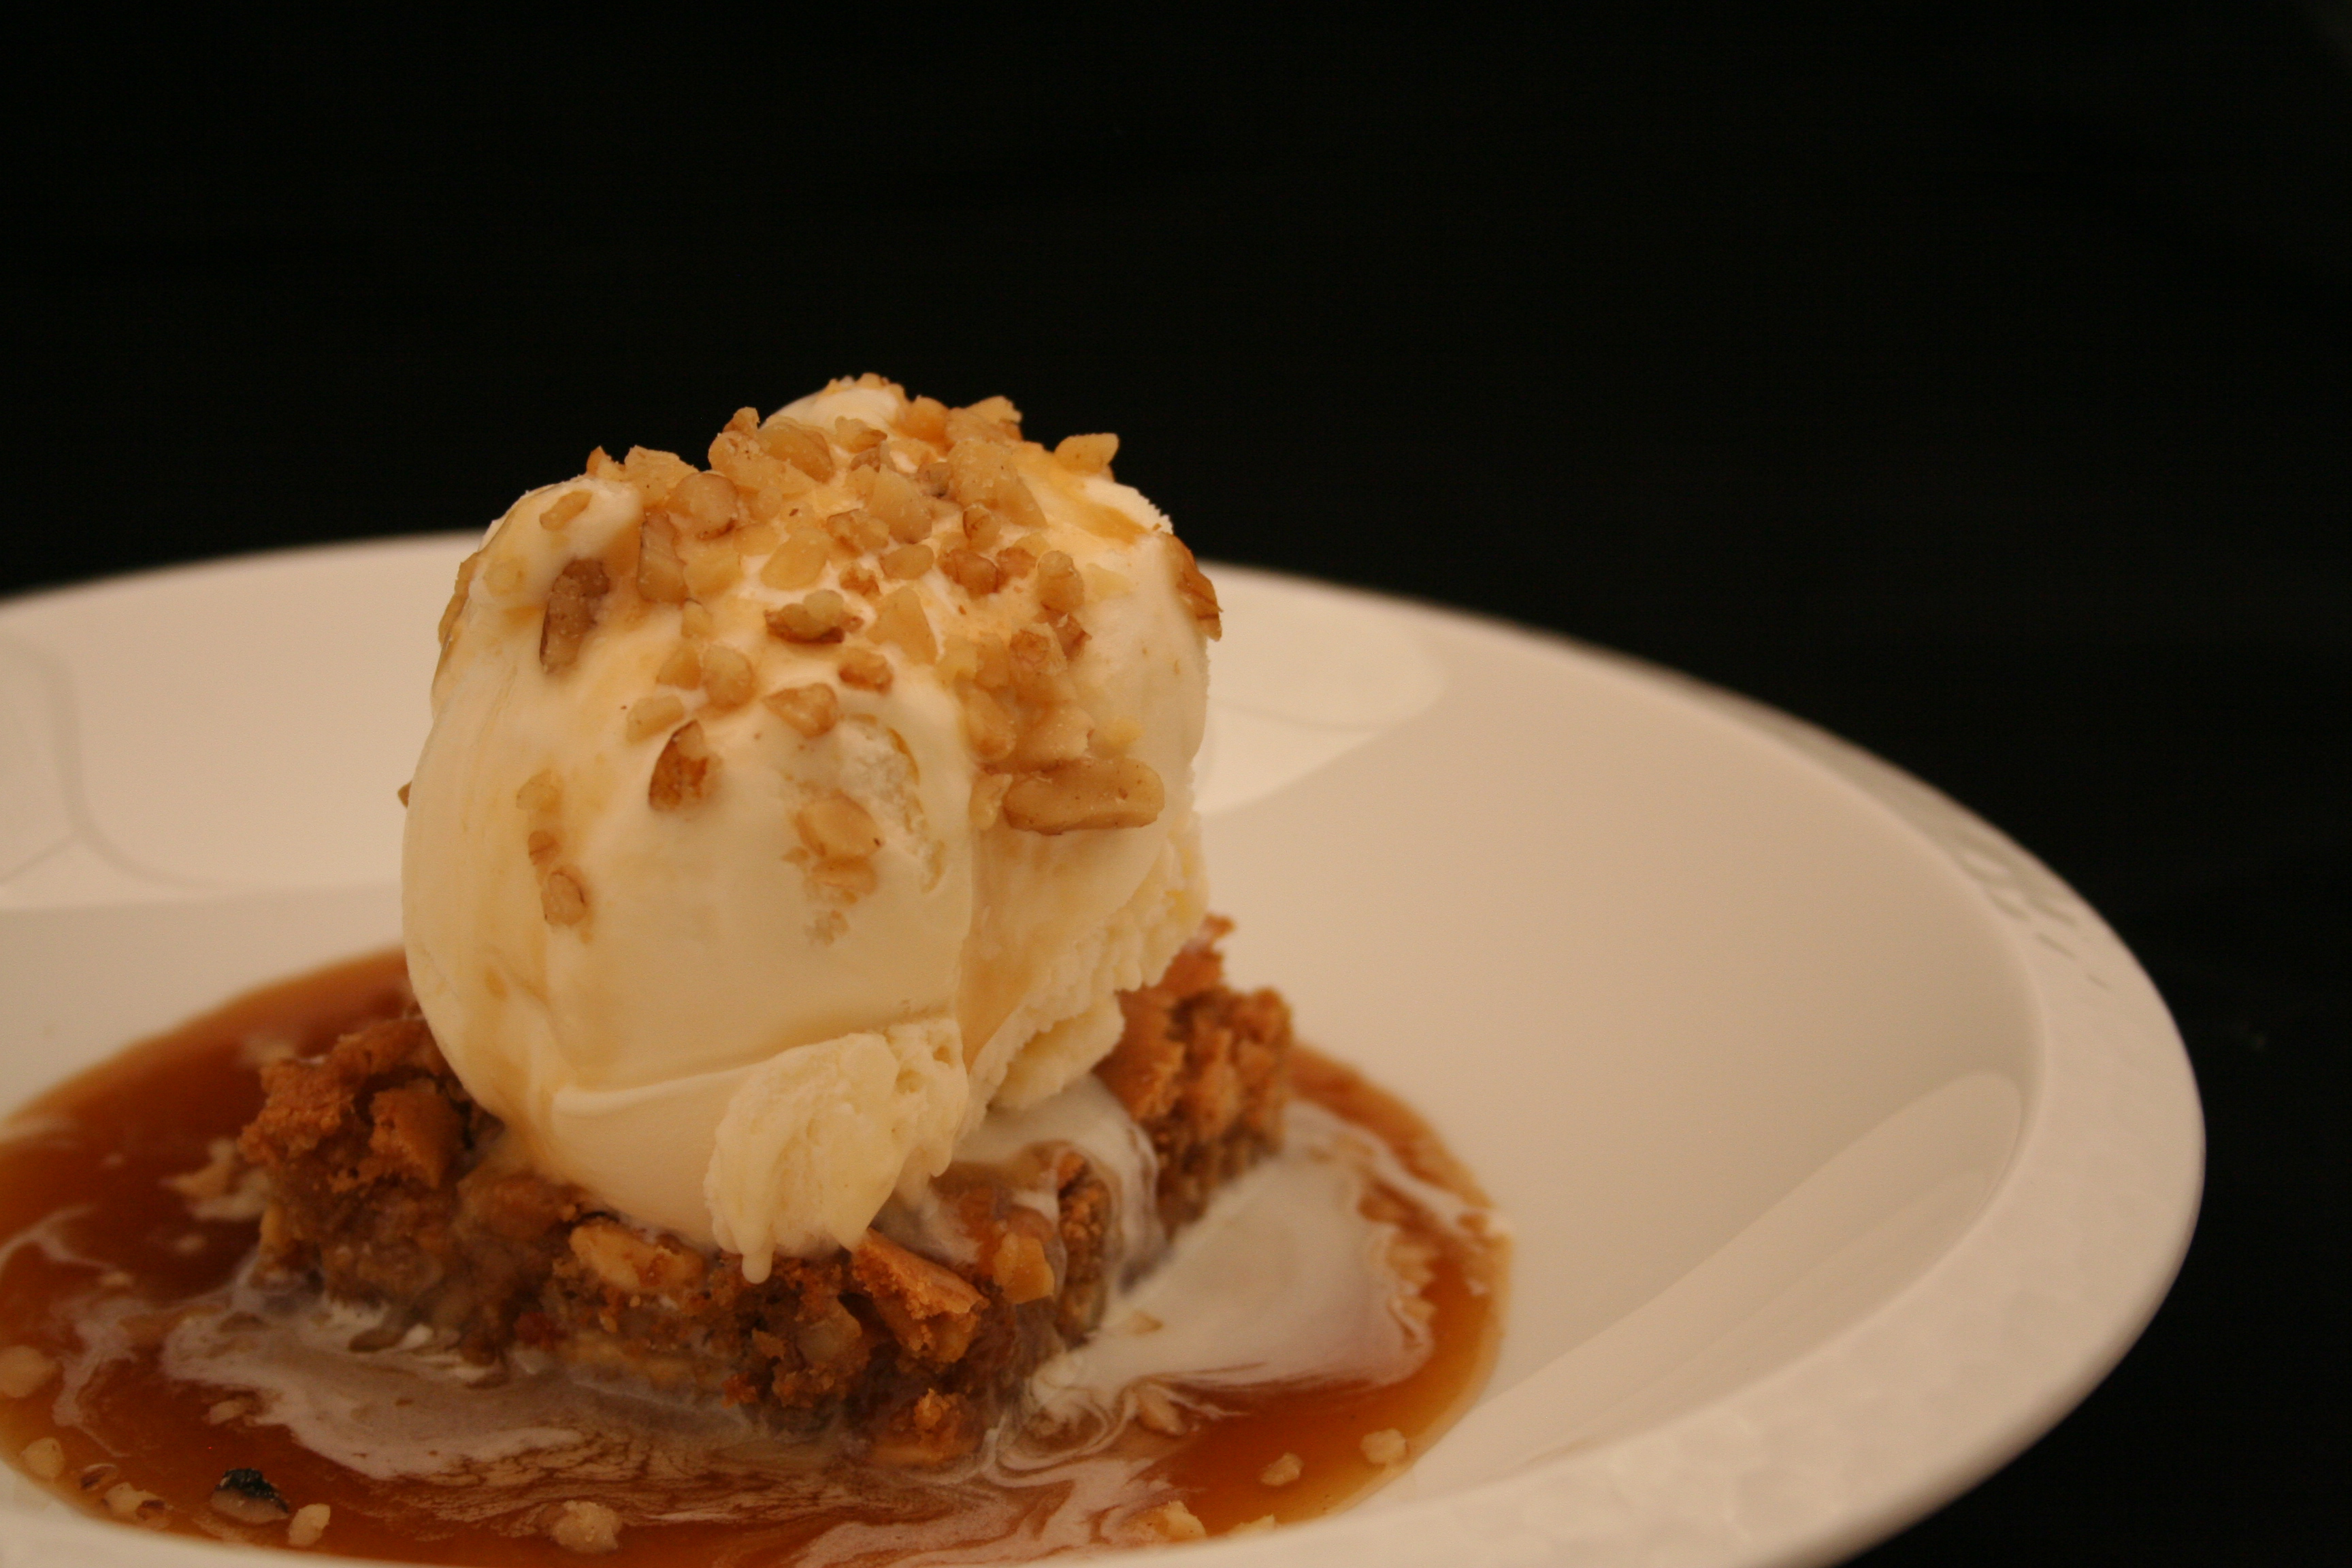 Walnut Blondie with Maple Butter Sauce (with ice cream of course)